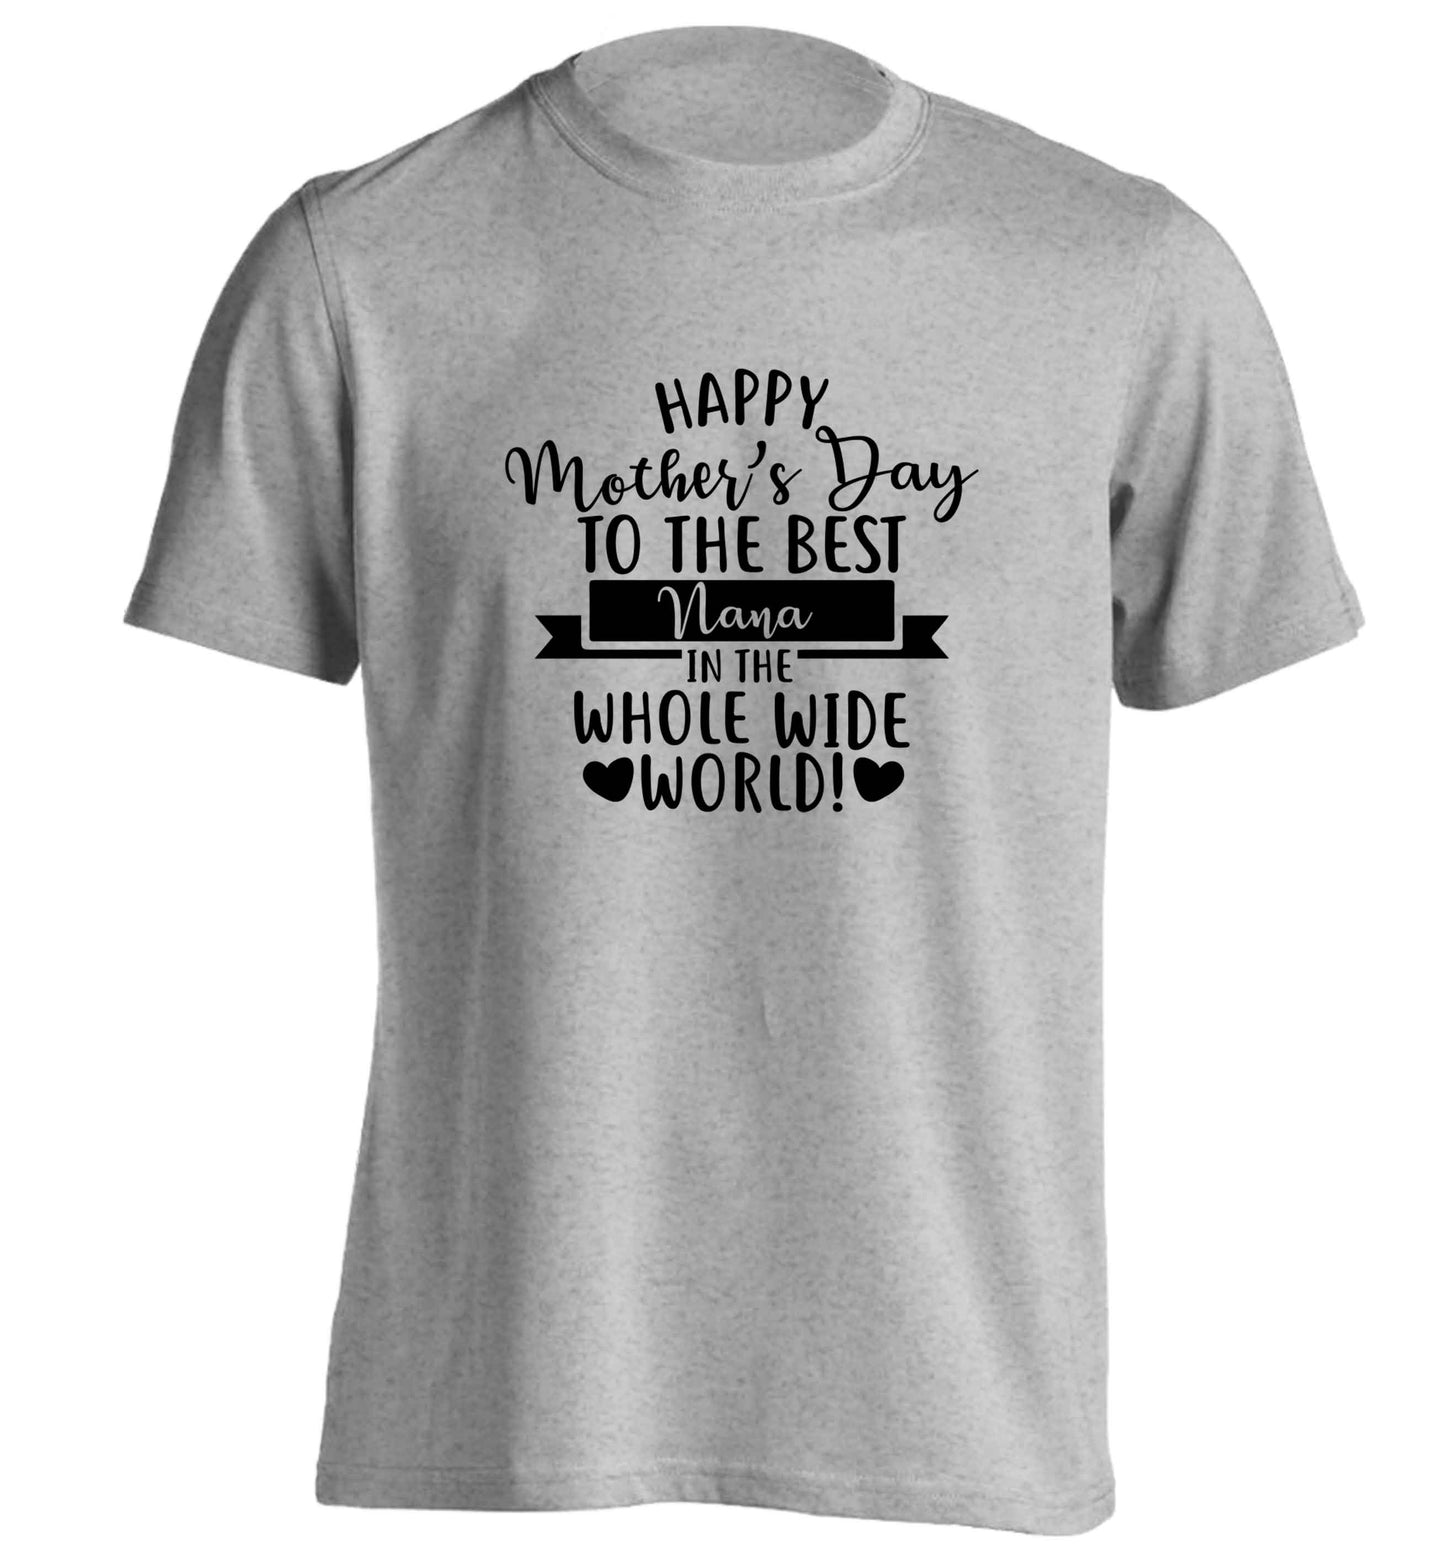 Happy mother's day to the best nana in the world adults unisex grey Tshirt 2XL